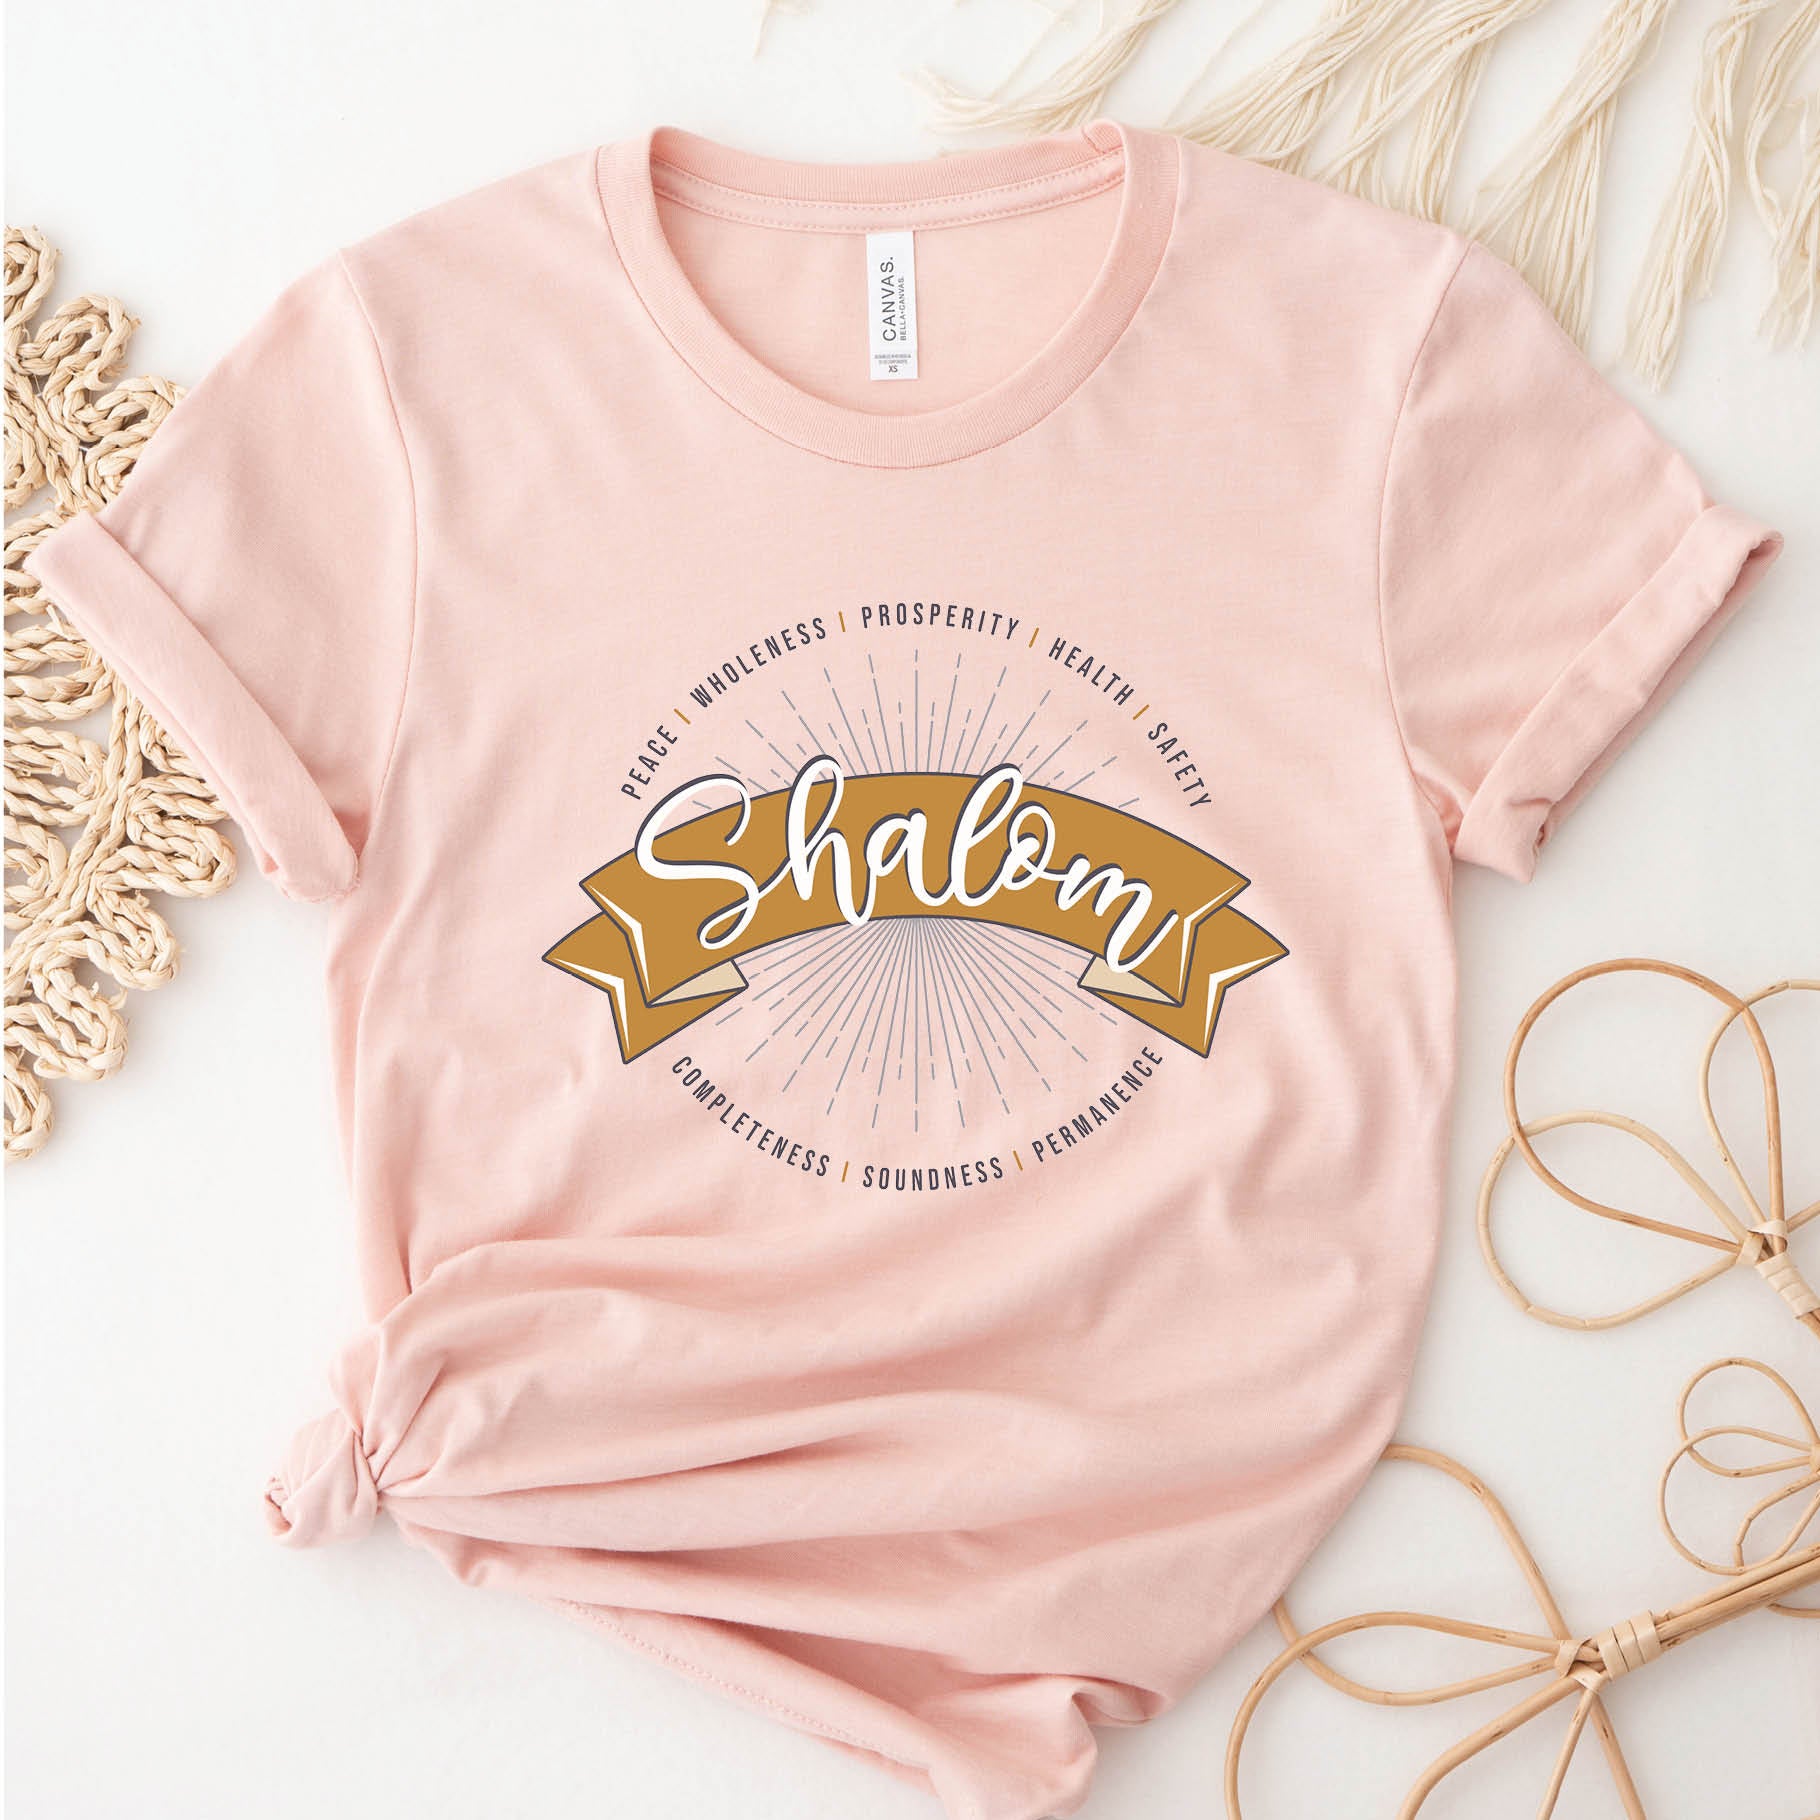 Soft heather prism peach faith-based Christian women's unisex t-shirt with a gold banner and sunburst design that says the Biblical Hebrew meaning of the word "SHALOM" - Peace, Completeness, Prosperity, Health, Safety, Wholeness, Soundness, and Permanence definition, makes a great mother's day gift for mom!